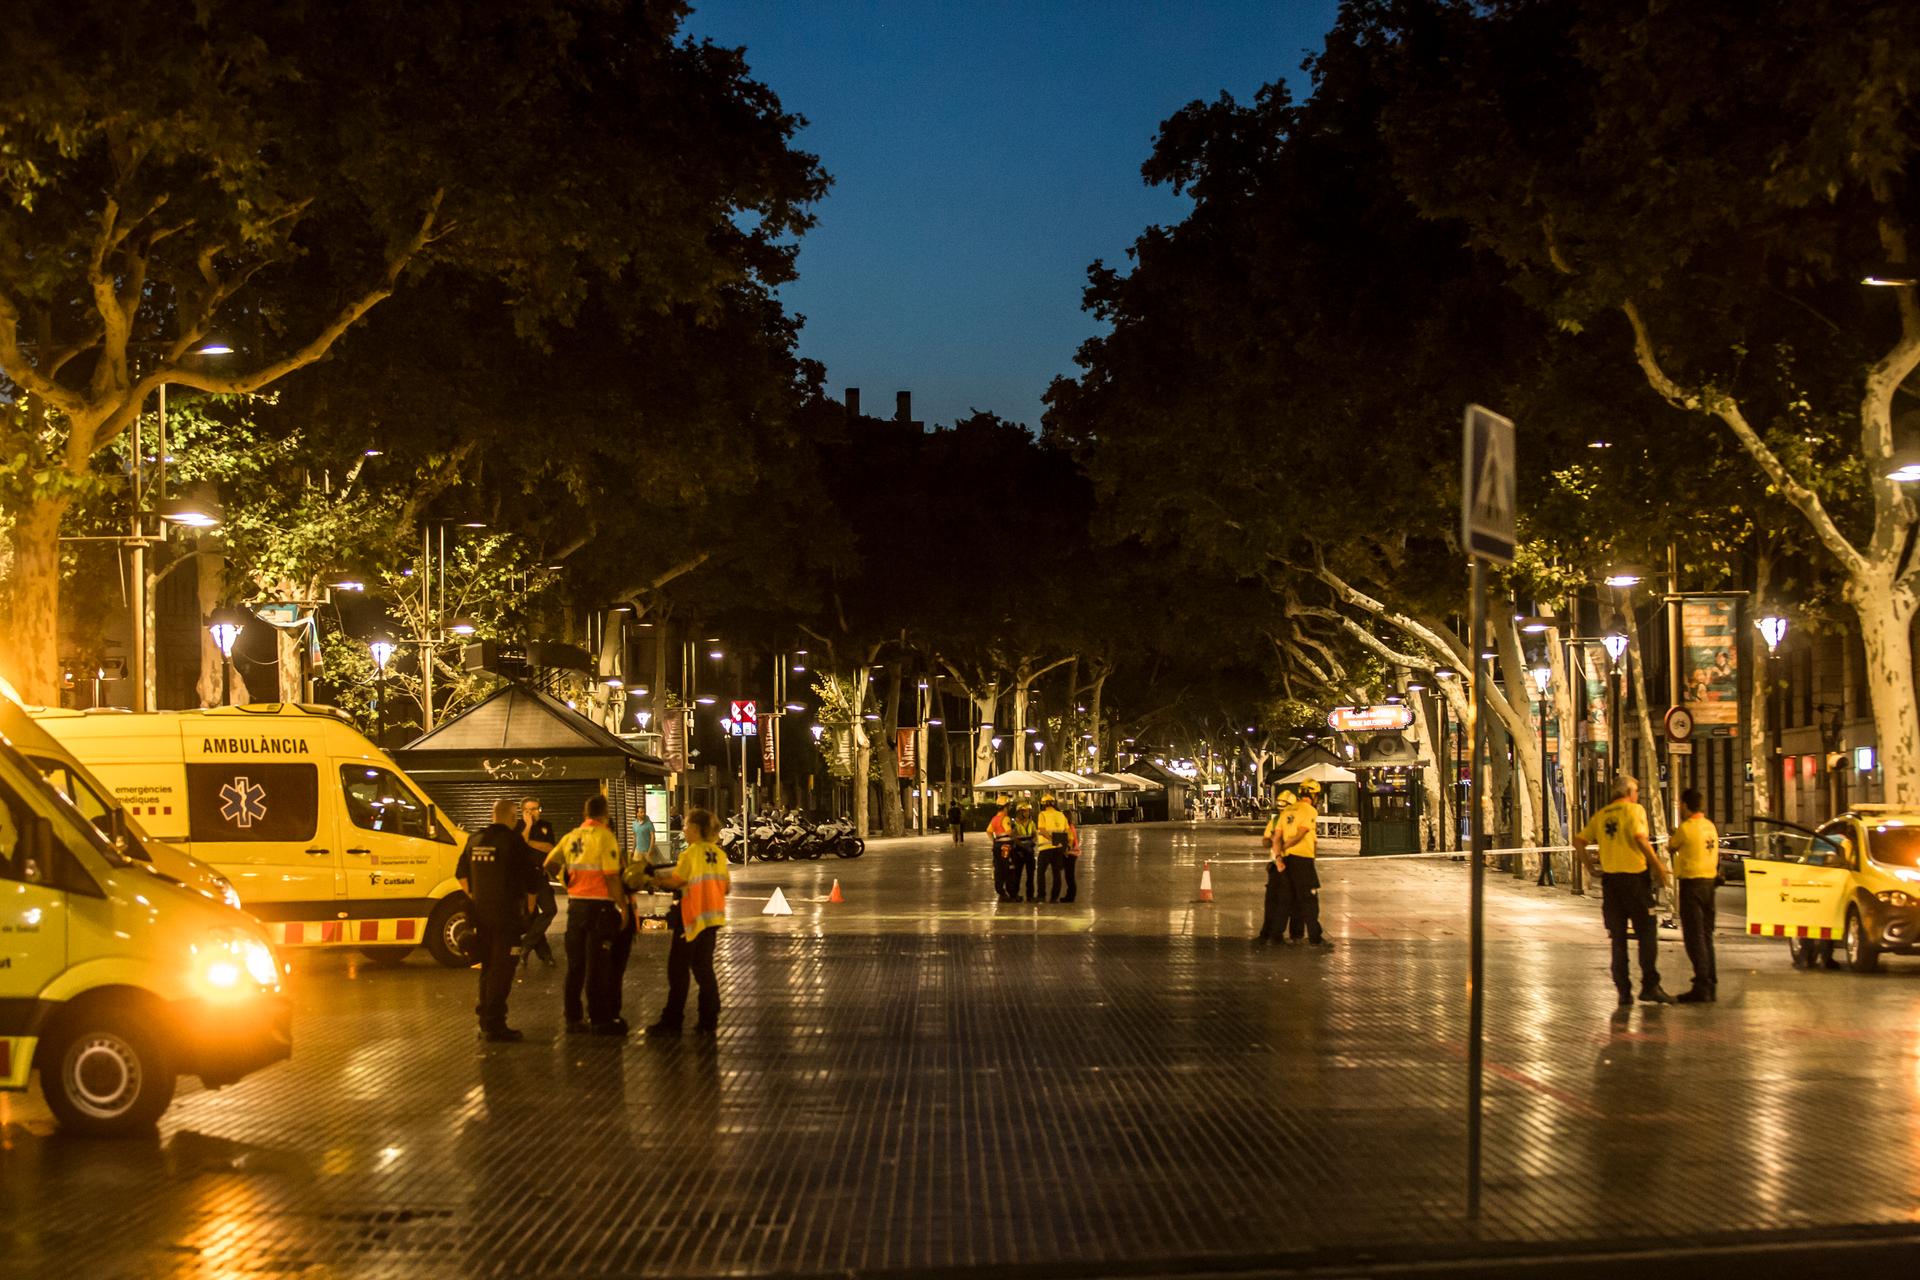 Las Ramblas of Barcelona, cordoned off the night after the attack.